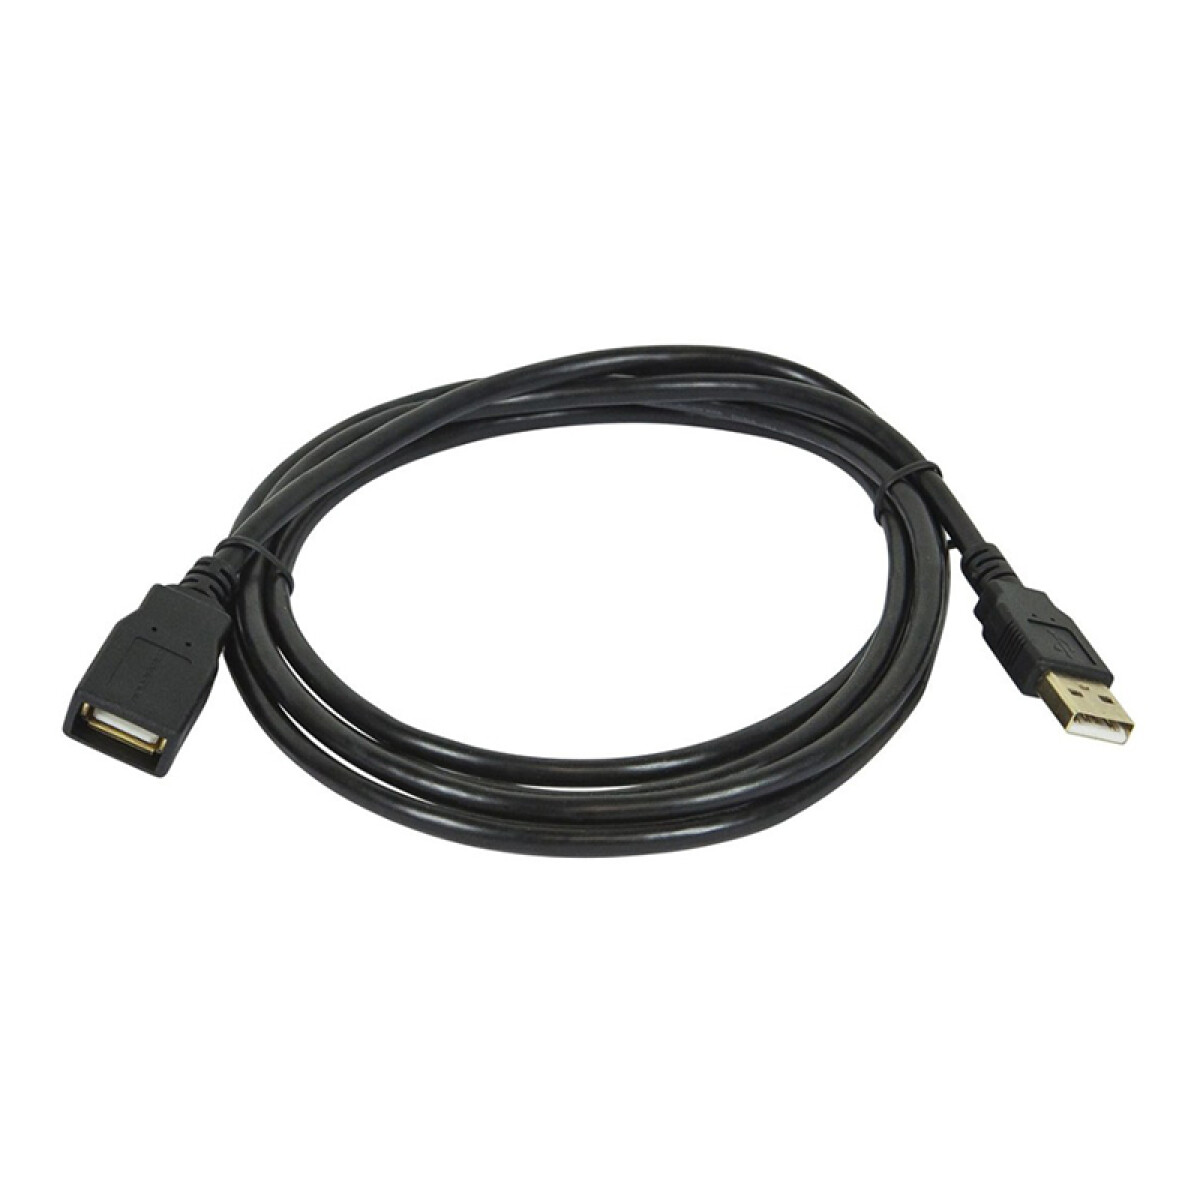 Cable extensor USB Xtreme 3mts 